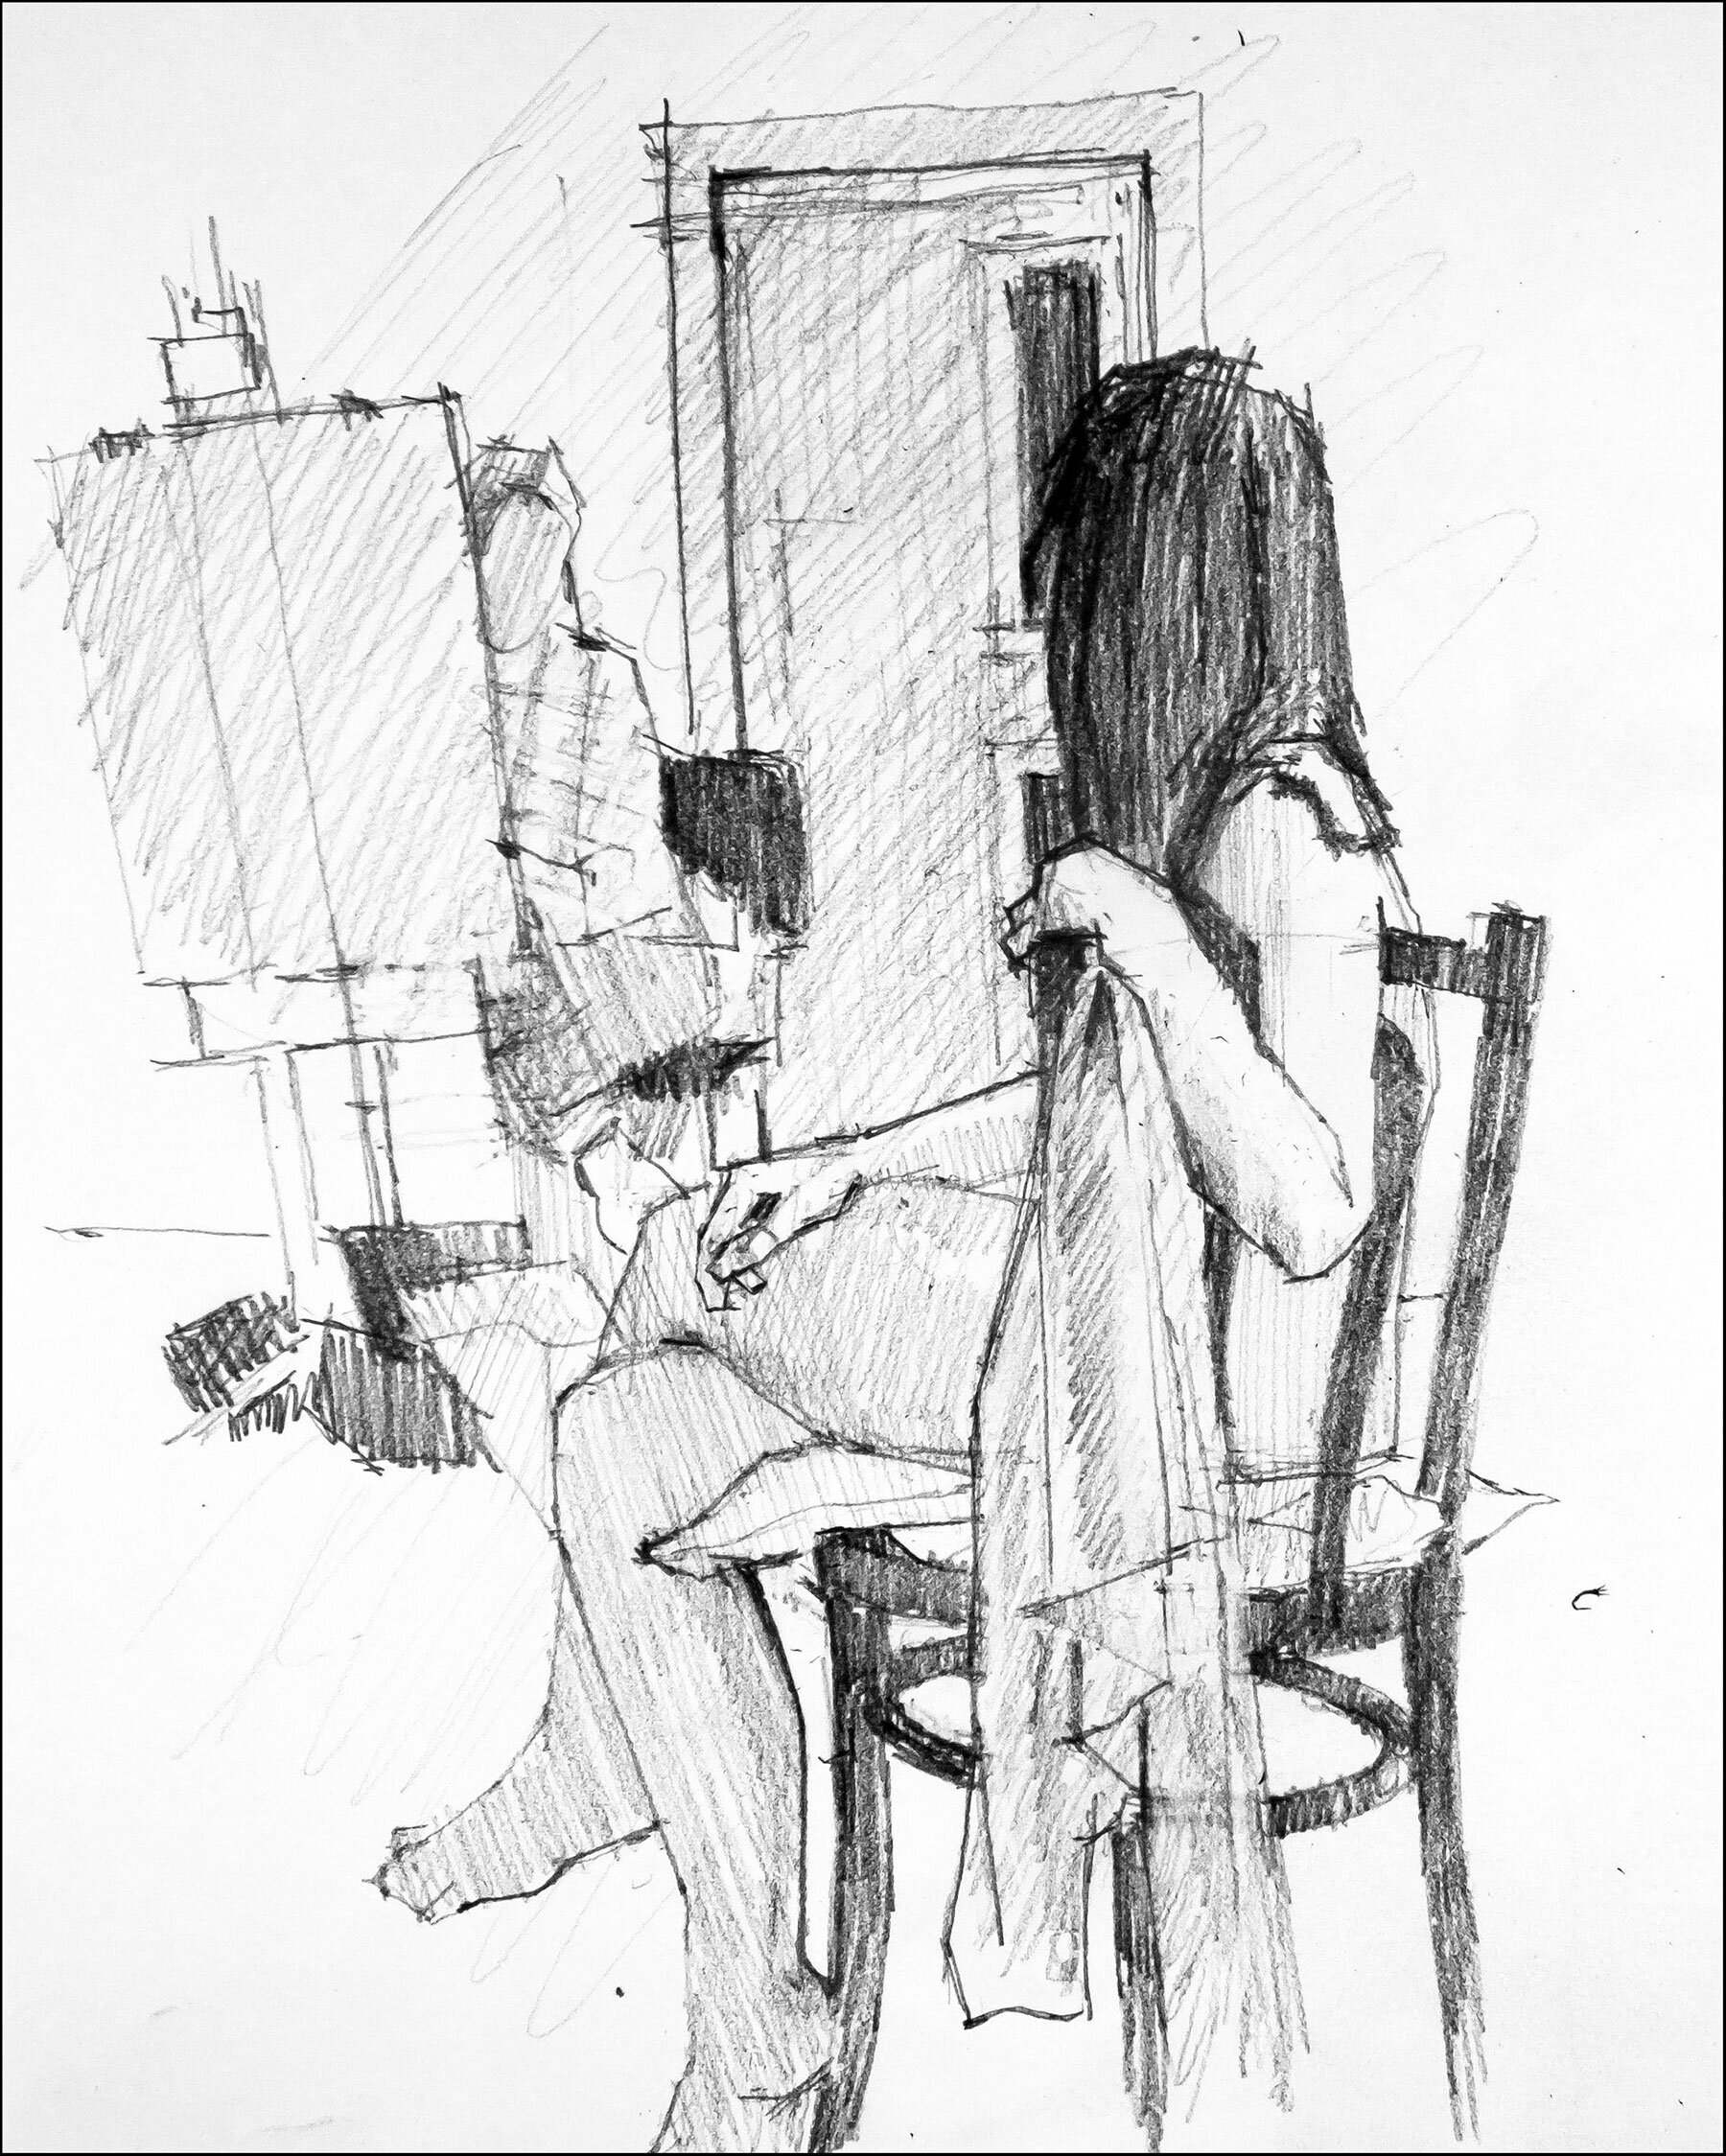 Everyday Life Drawings for Sale - Fine Art America